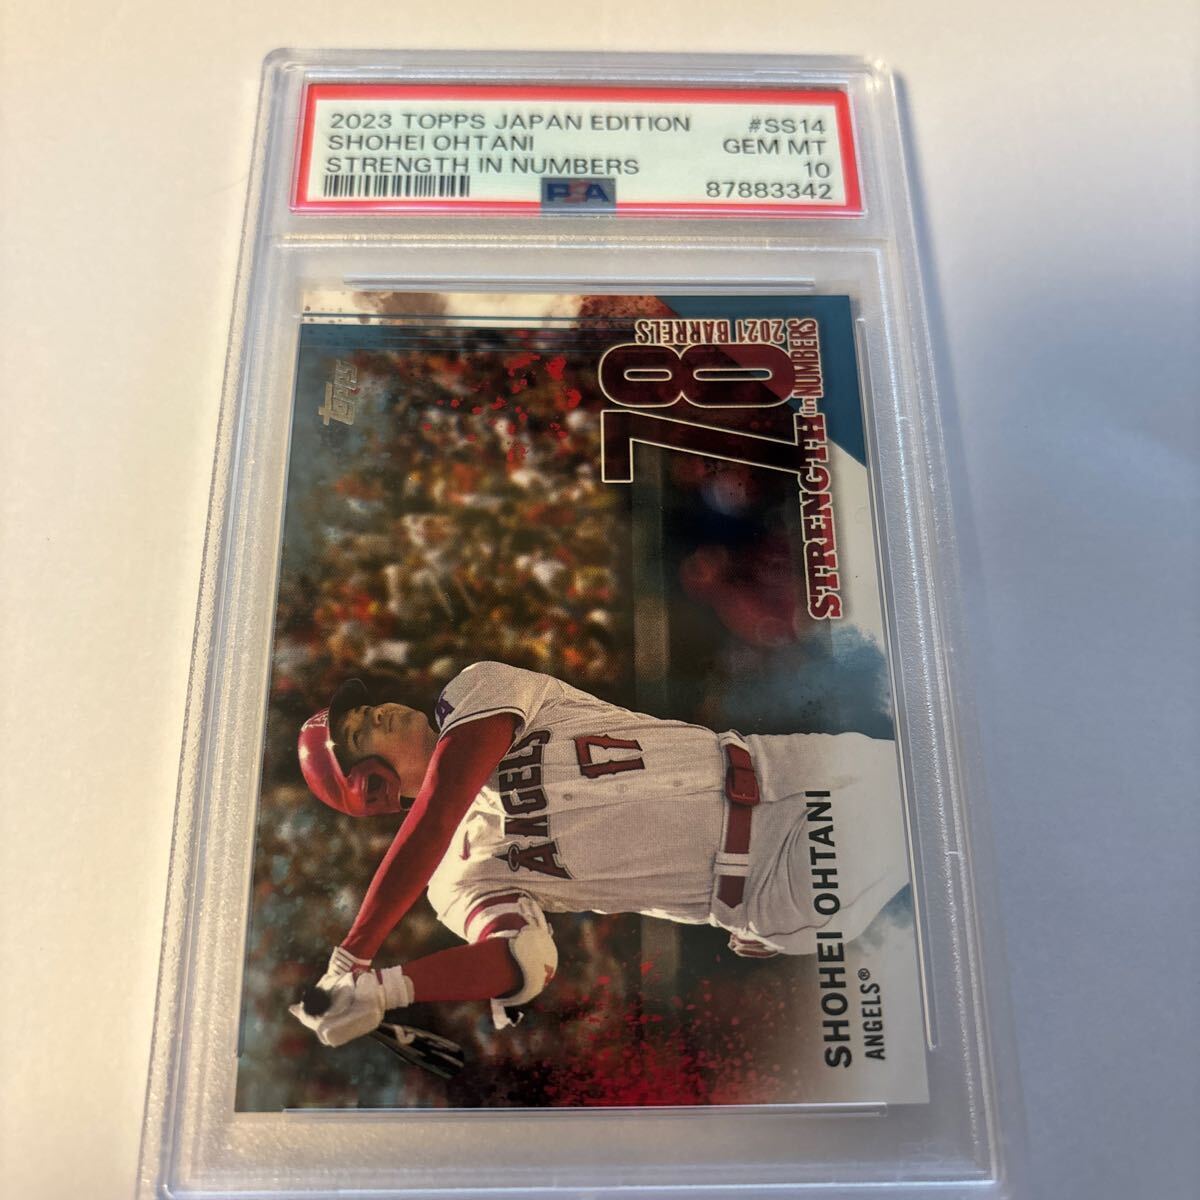 psa10 topps JAPAN EDITION 大谷翔平 STRENGTH IN NUMBERSの画像1